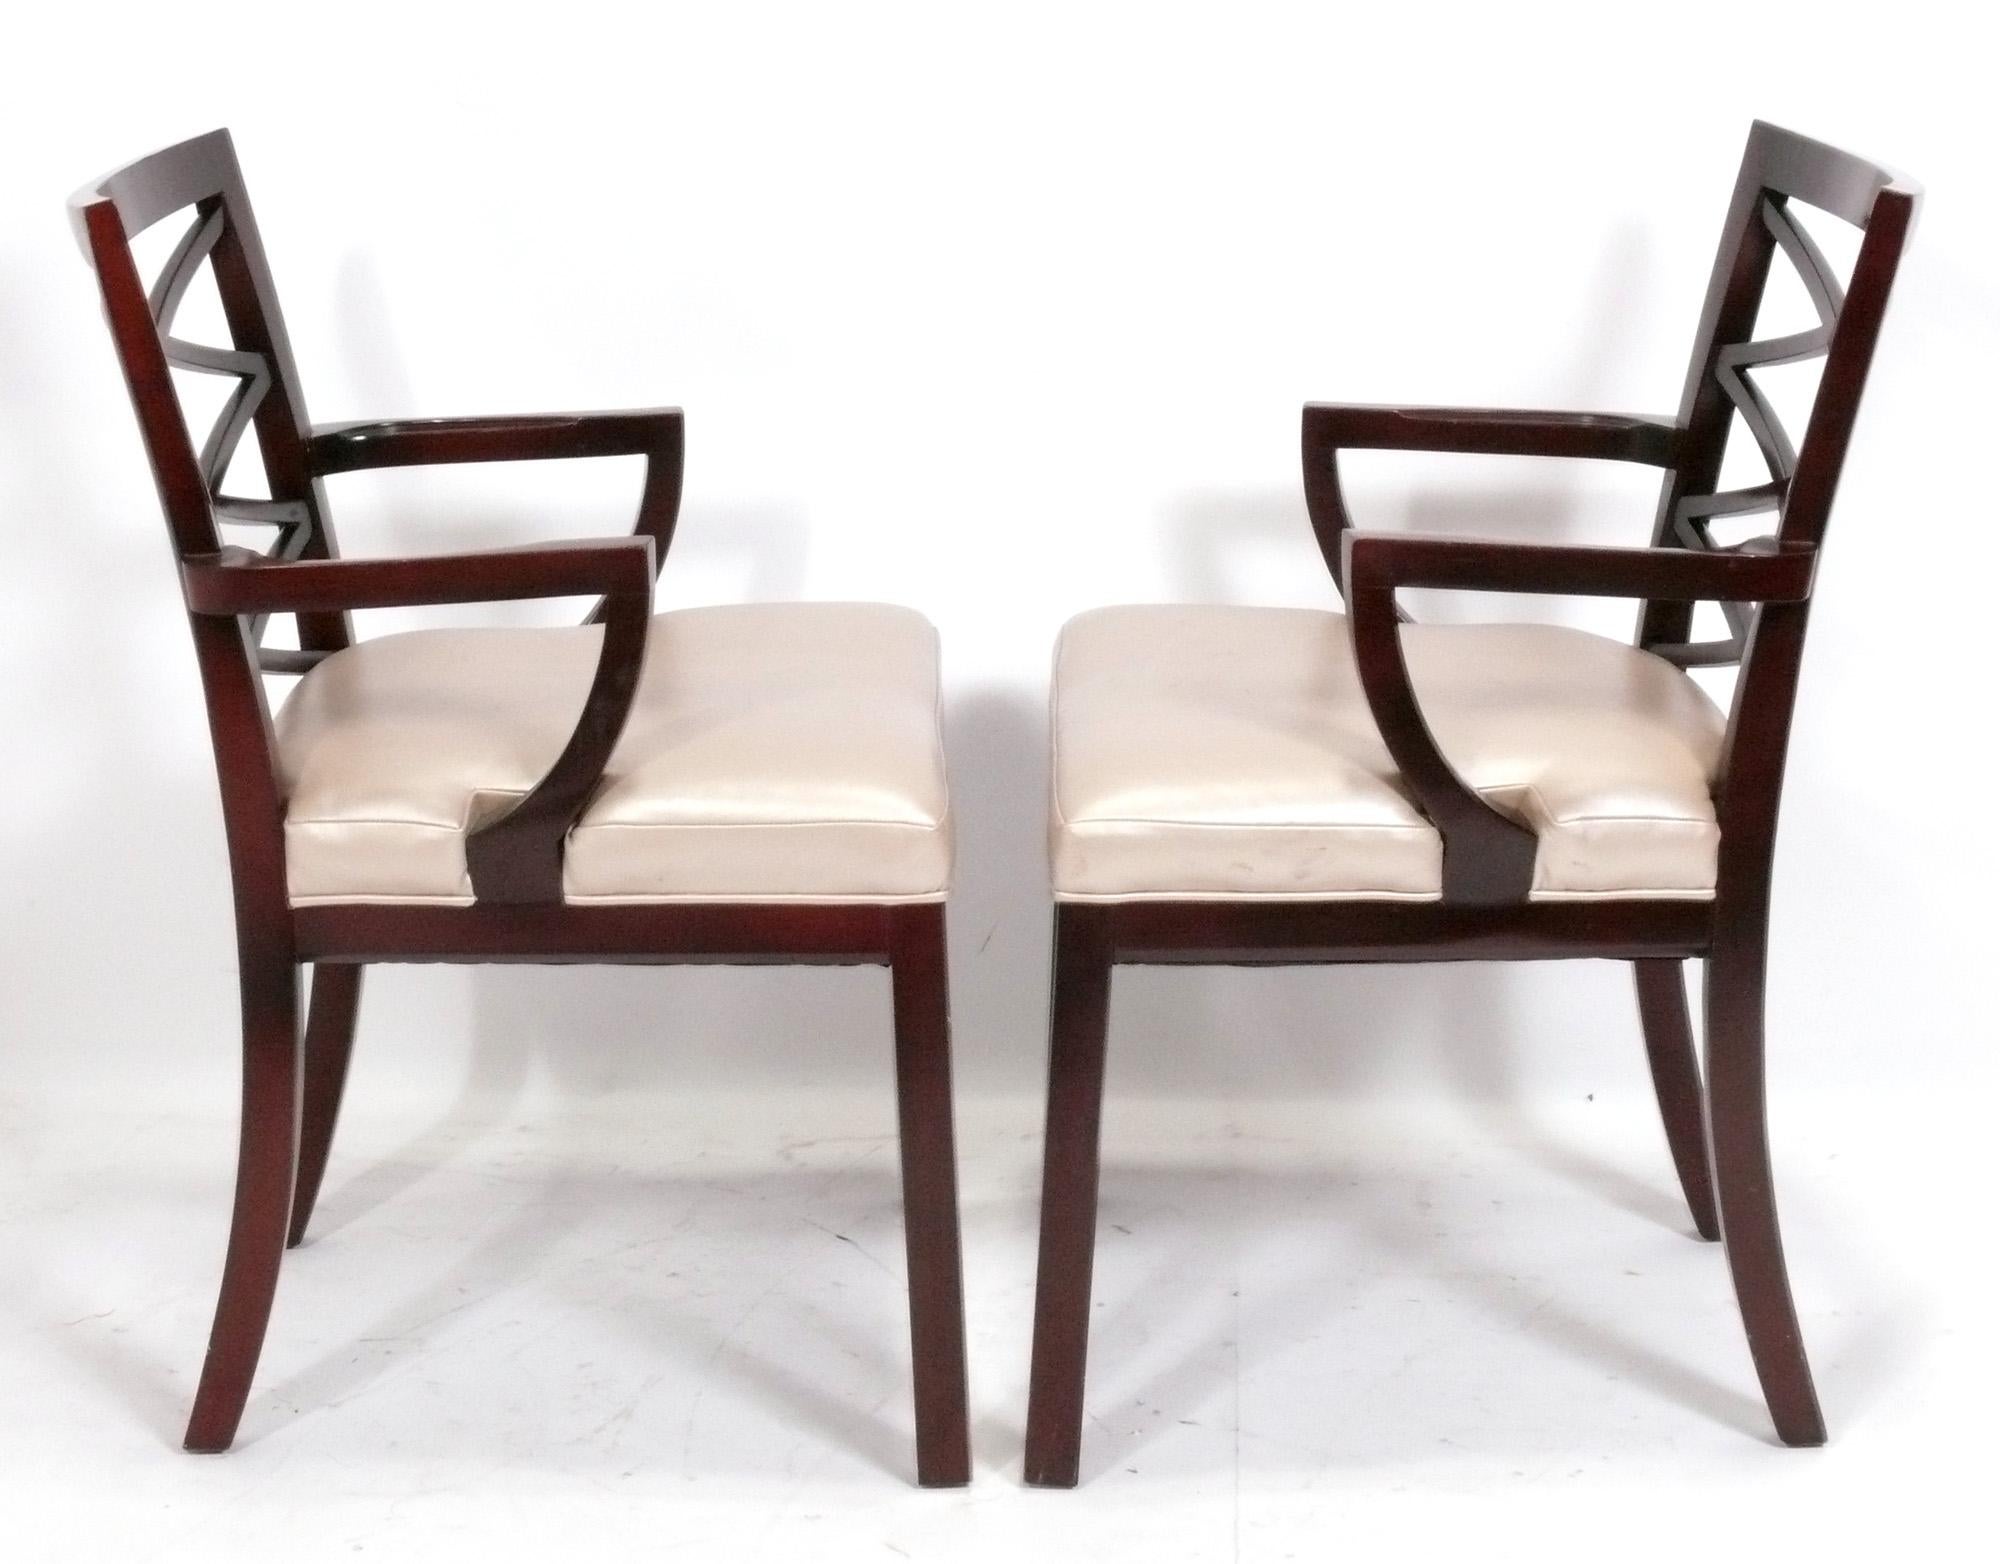 Set of Six Elegant X Back Dining Chairs, made by Councill, American, circa 2000s. They have an elegant X back design and are finished in a high gloss deep brown color finish. These chairs are currently being reupholstered and the price noted